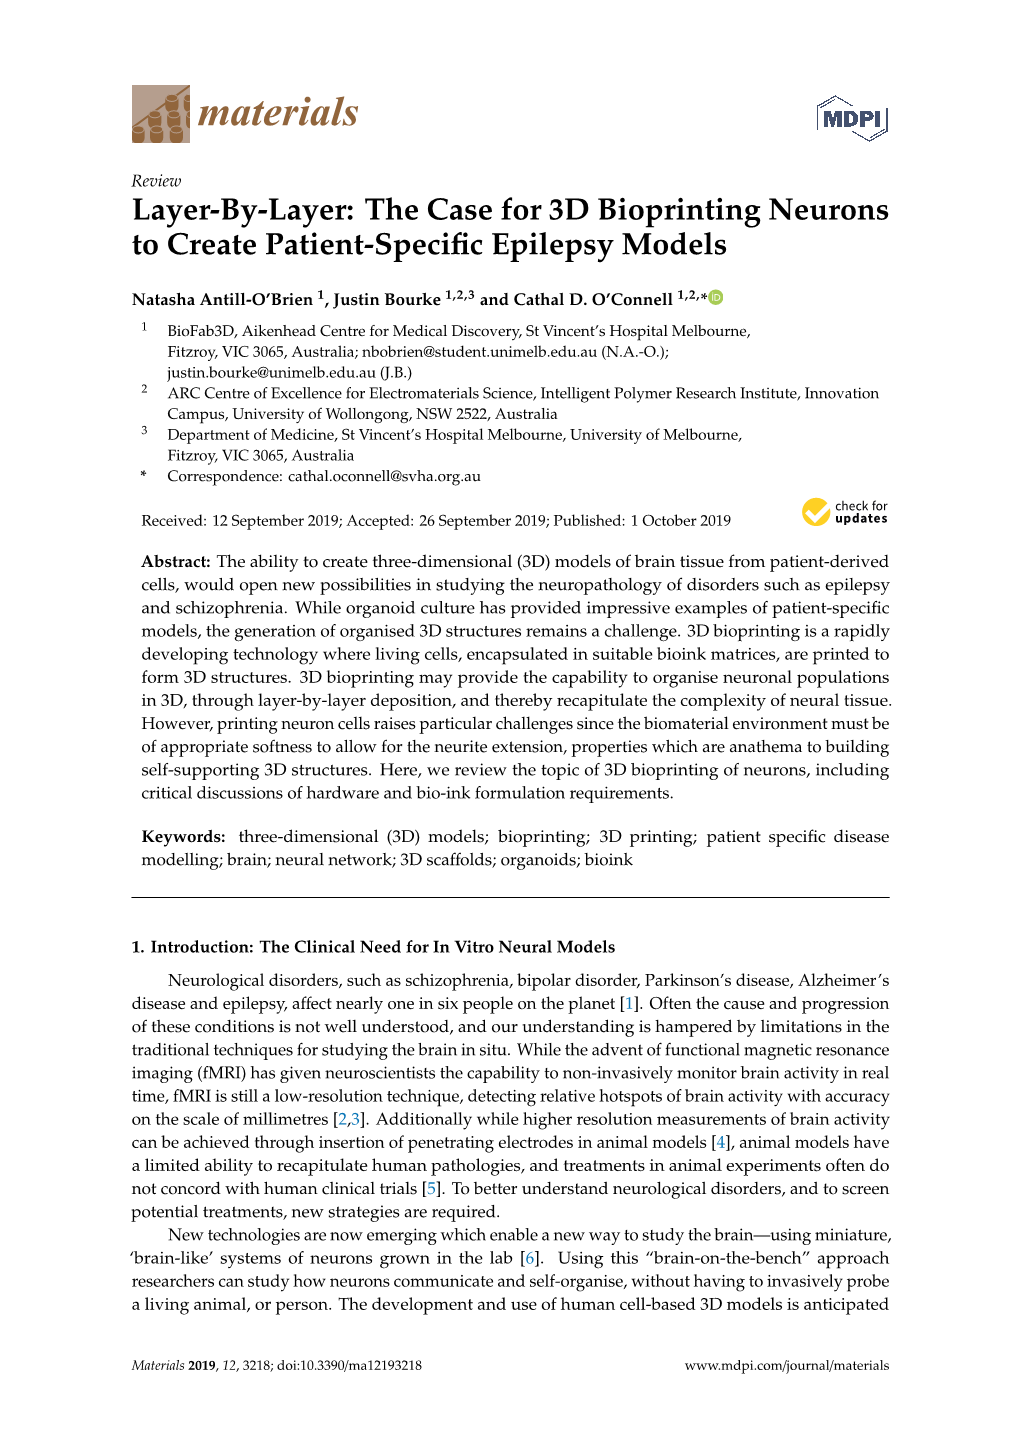 The Case for 3D Bioprinting Neurons to Create Patient-Specific Epilepsy